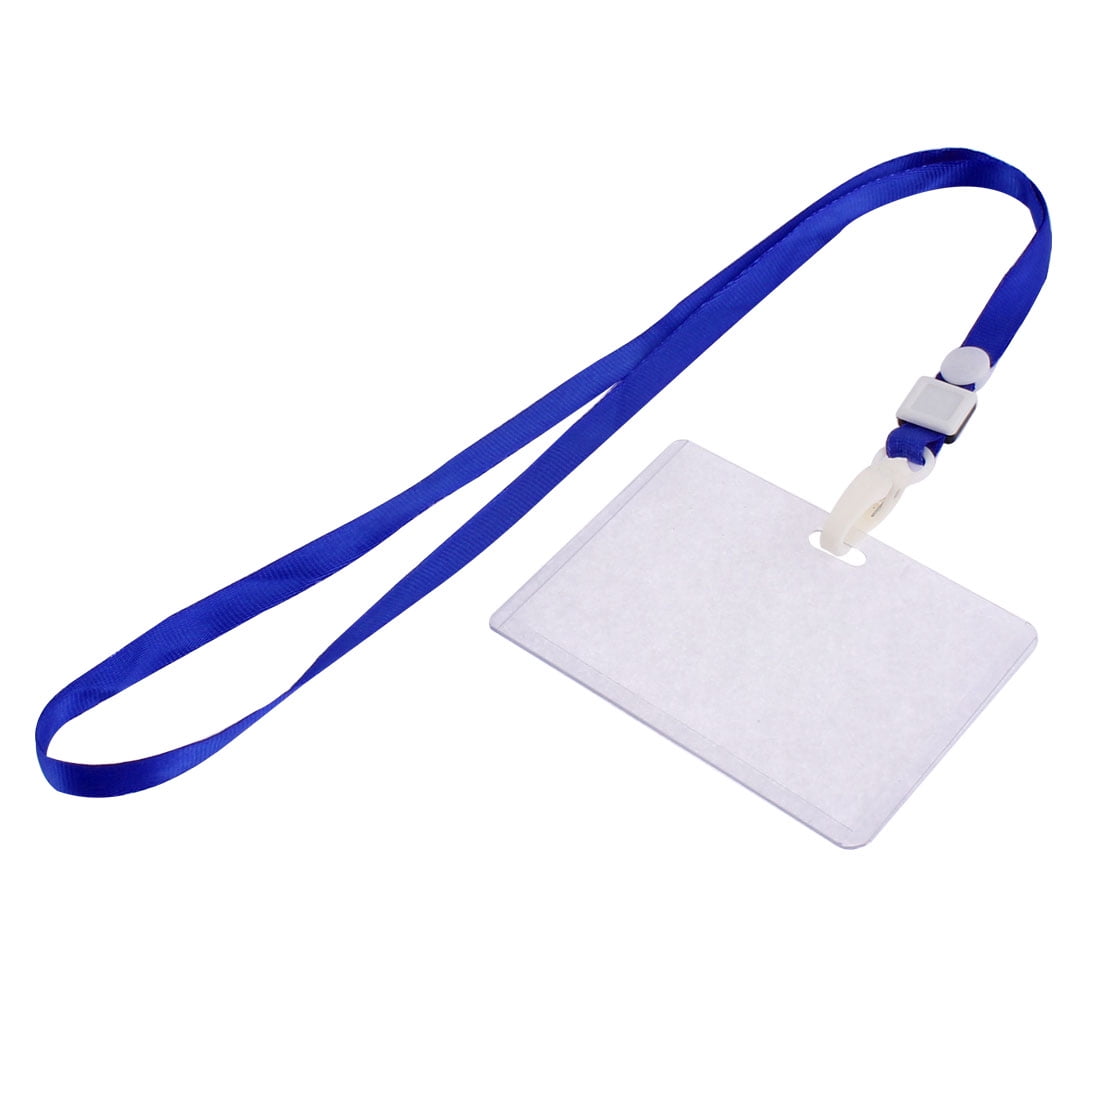 Transparent 5 Pieces Acrylic Card Badge Holder With Lanyard for School Office 